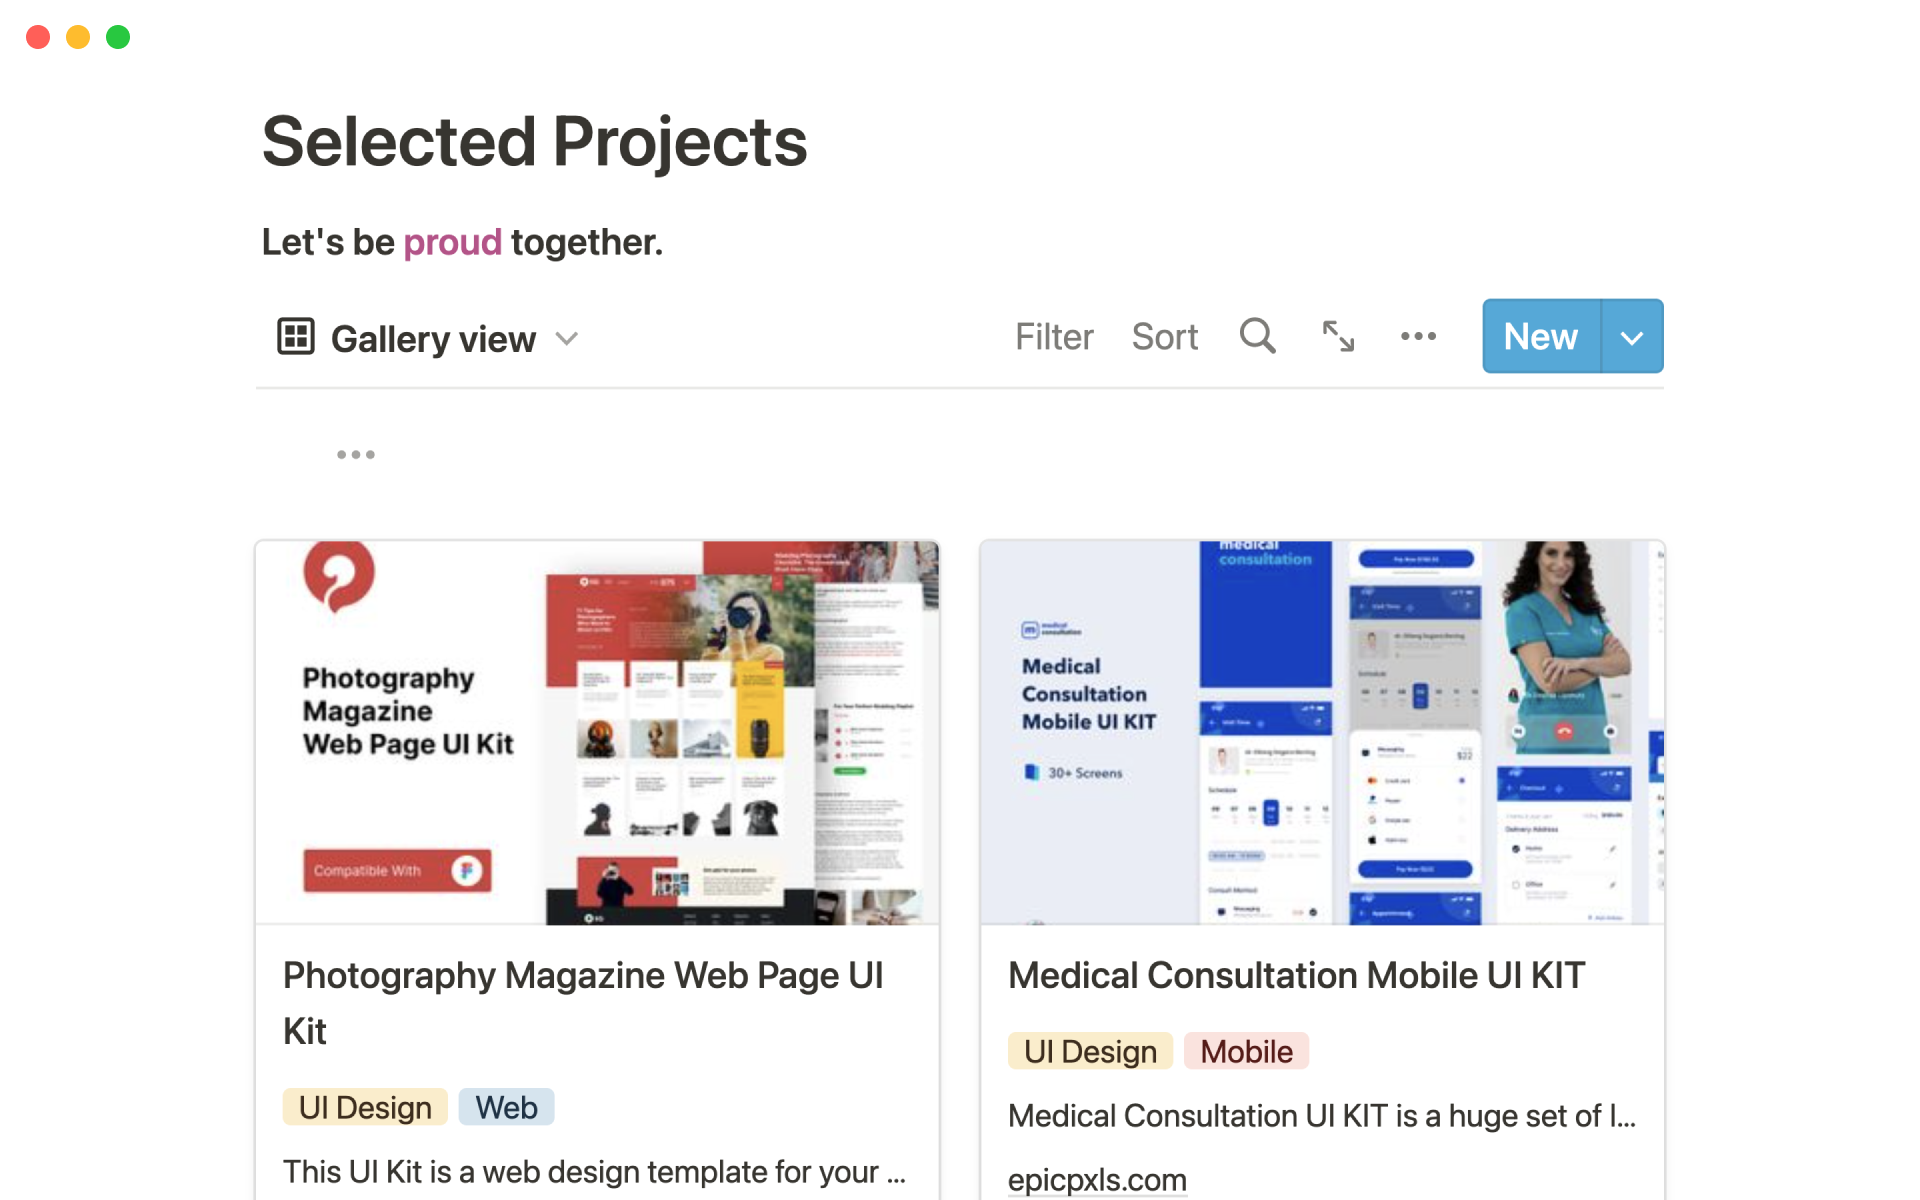 Easily share your projects with others and get your design portfolio online.